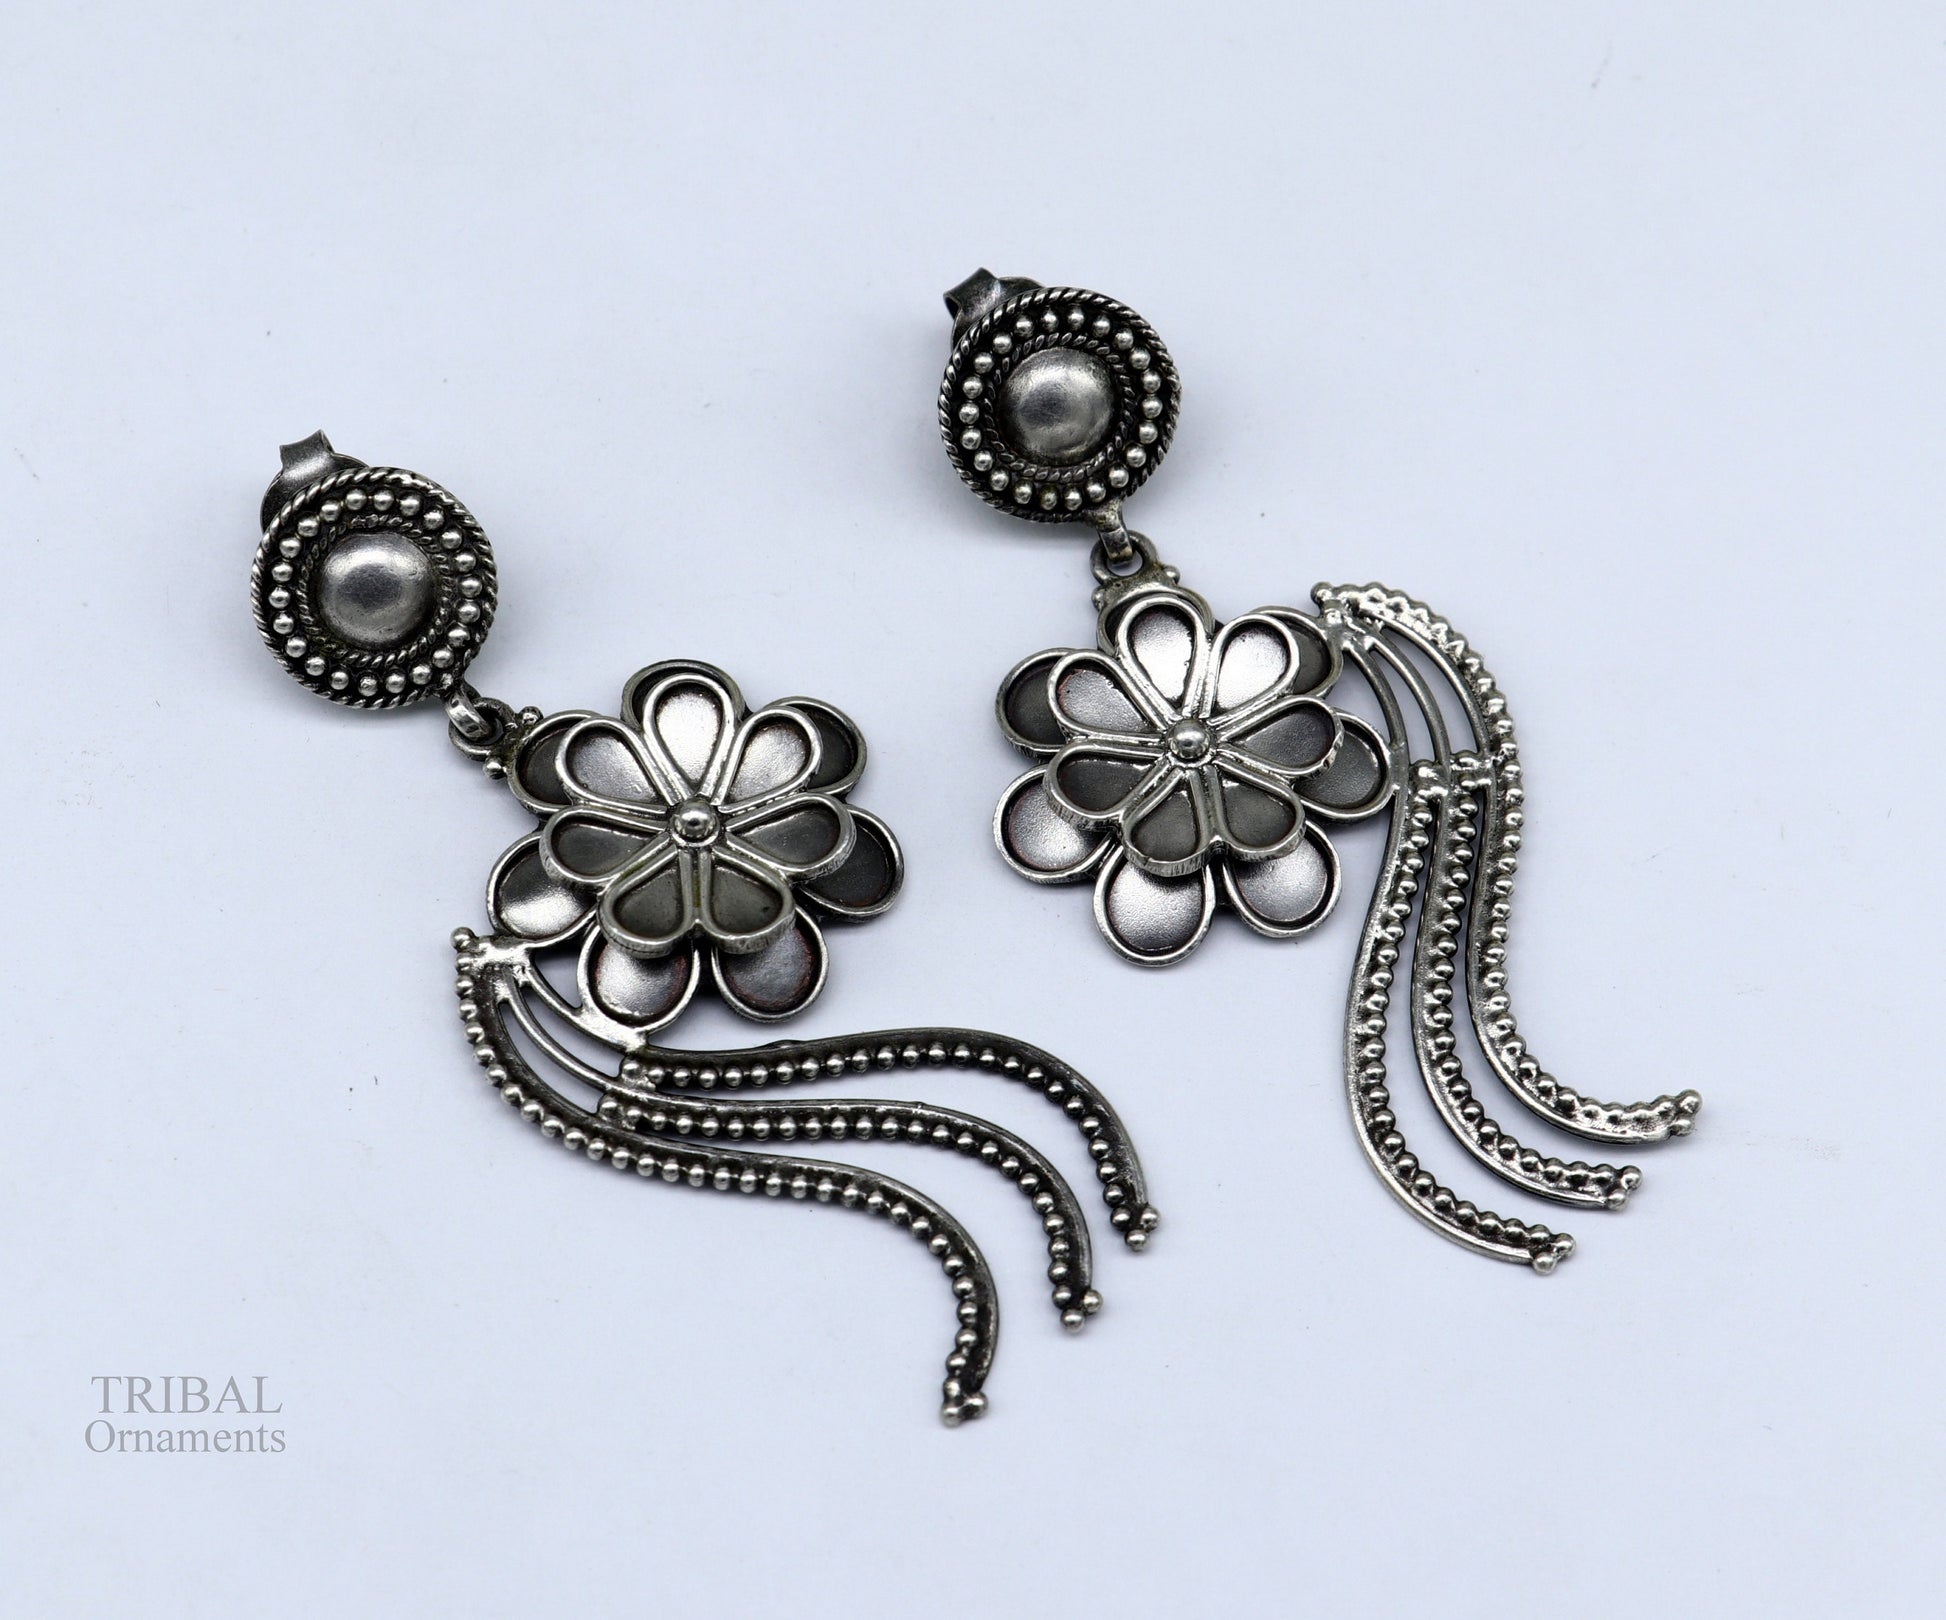 925 sterling silver handmade unique fancy design floral stud earring attractive gifting jewelry, tribal earring drop dangle ear1108 - TRIBAL ORNAMENTS